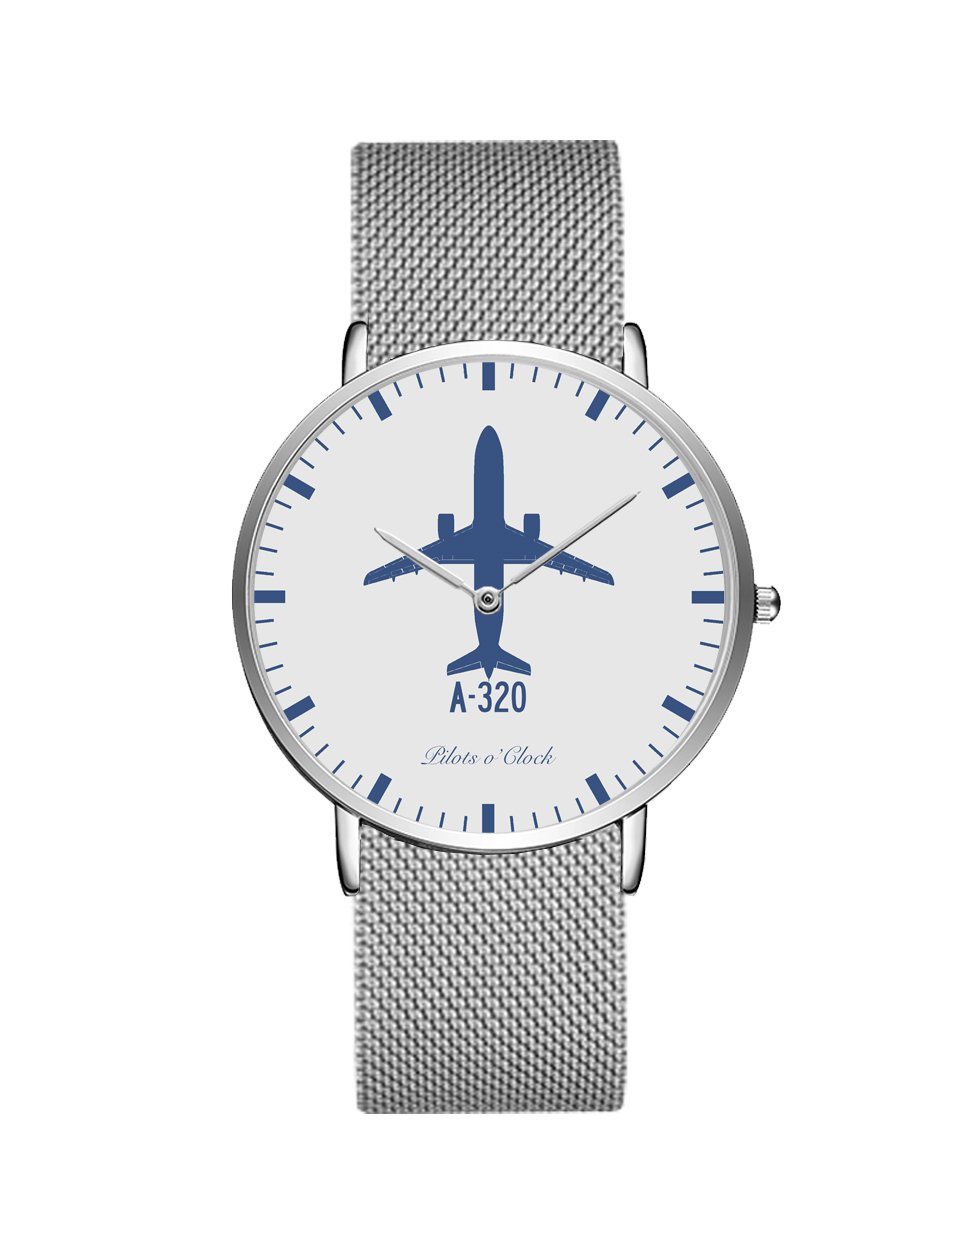 Airbus A320 Stainless Steel Strap Watches Pilot Eyes Store Silver & Silver Stainless Steel Strap 